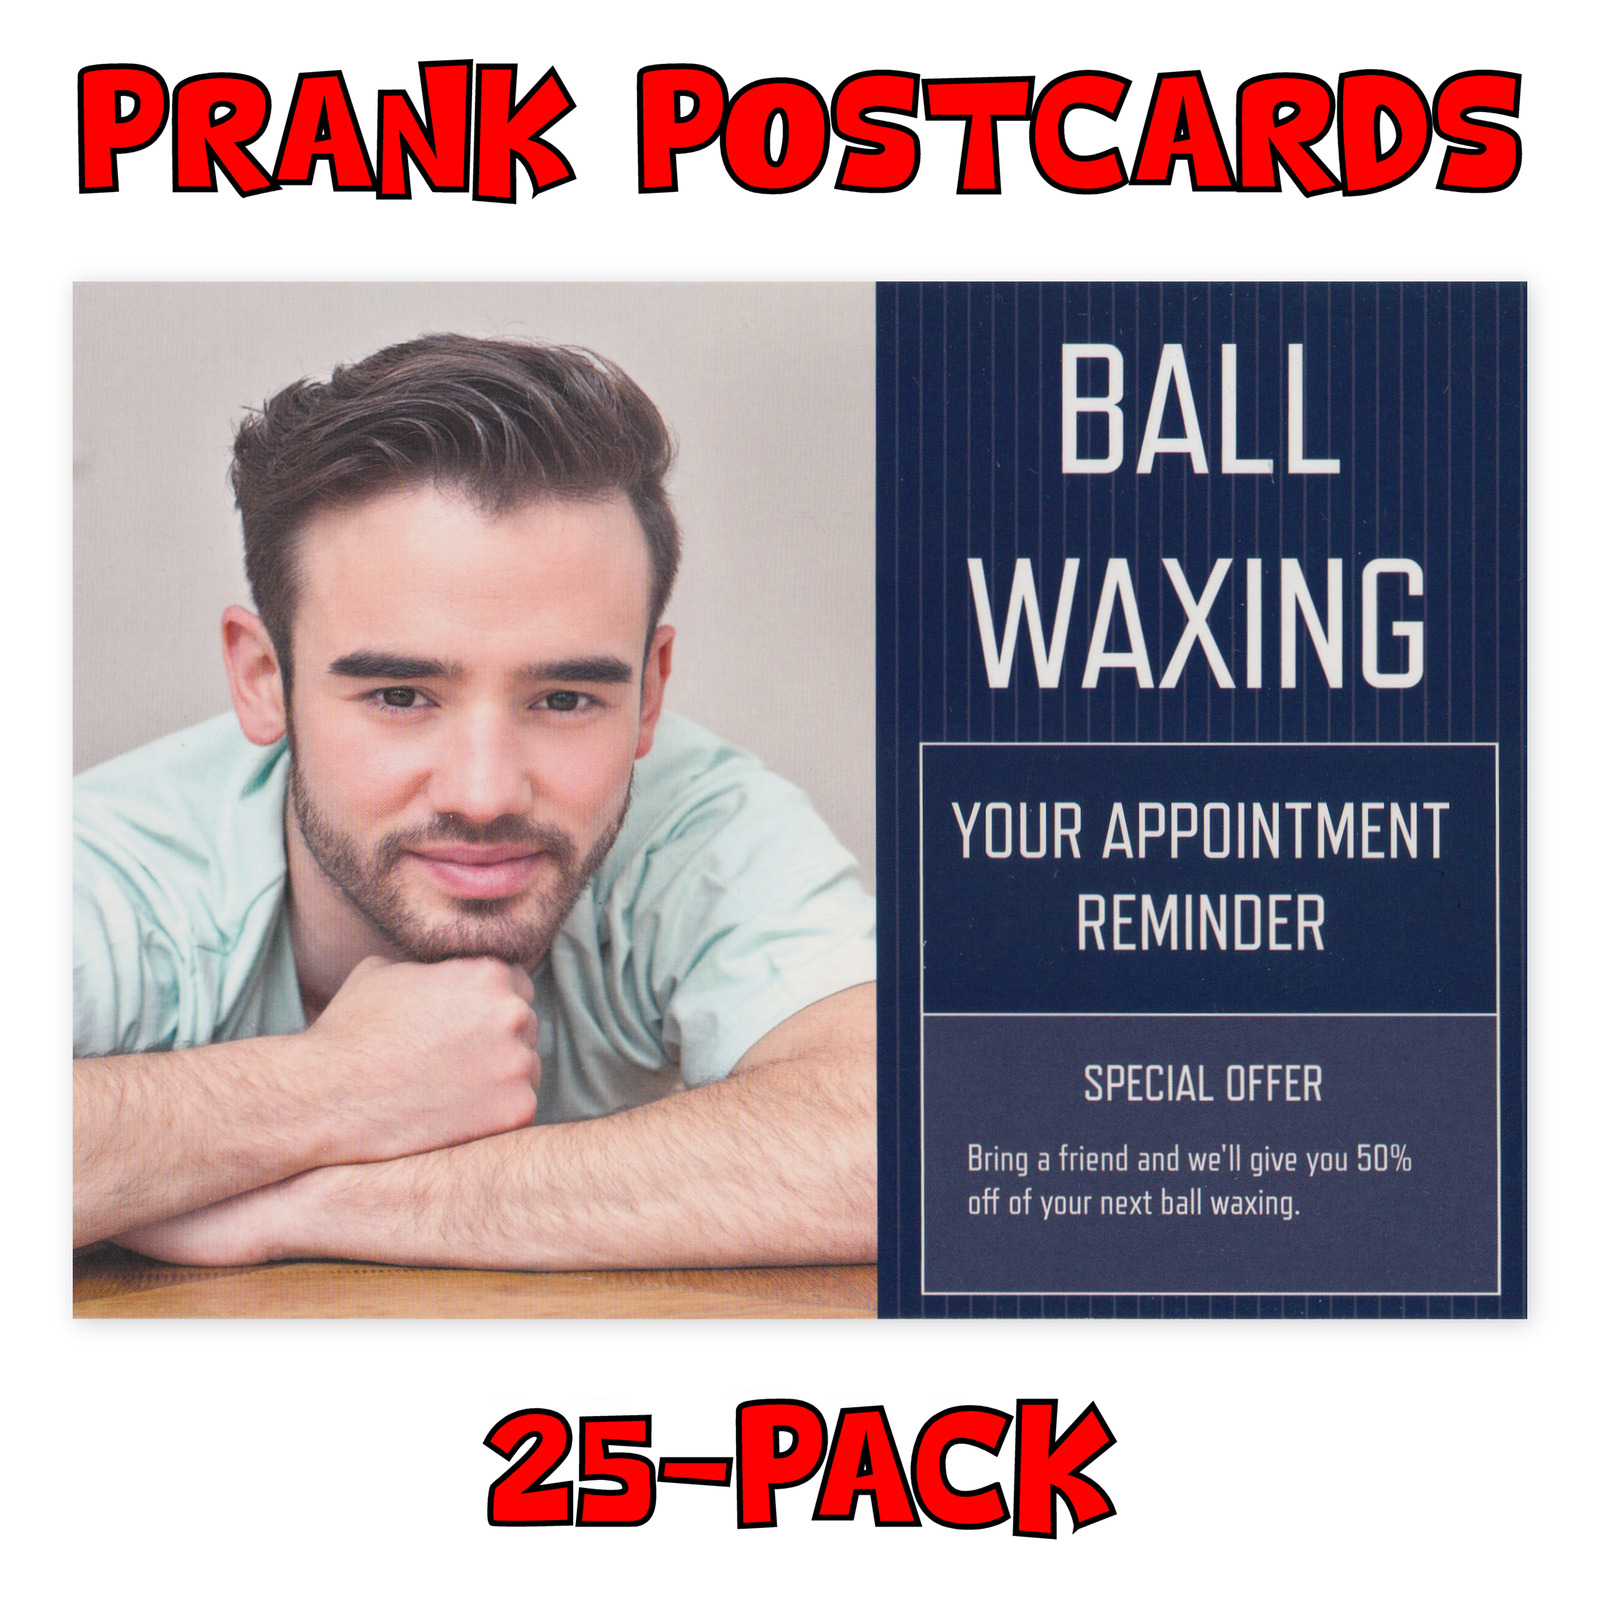 (25-Pack) Prank Postcards - Ball Waxing - Send Them To Your Victims Yourself